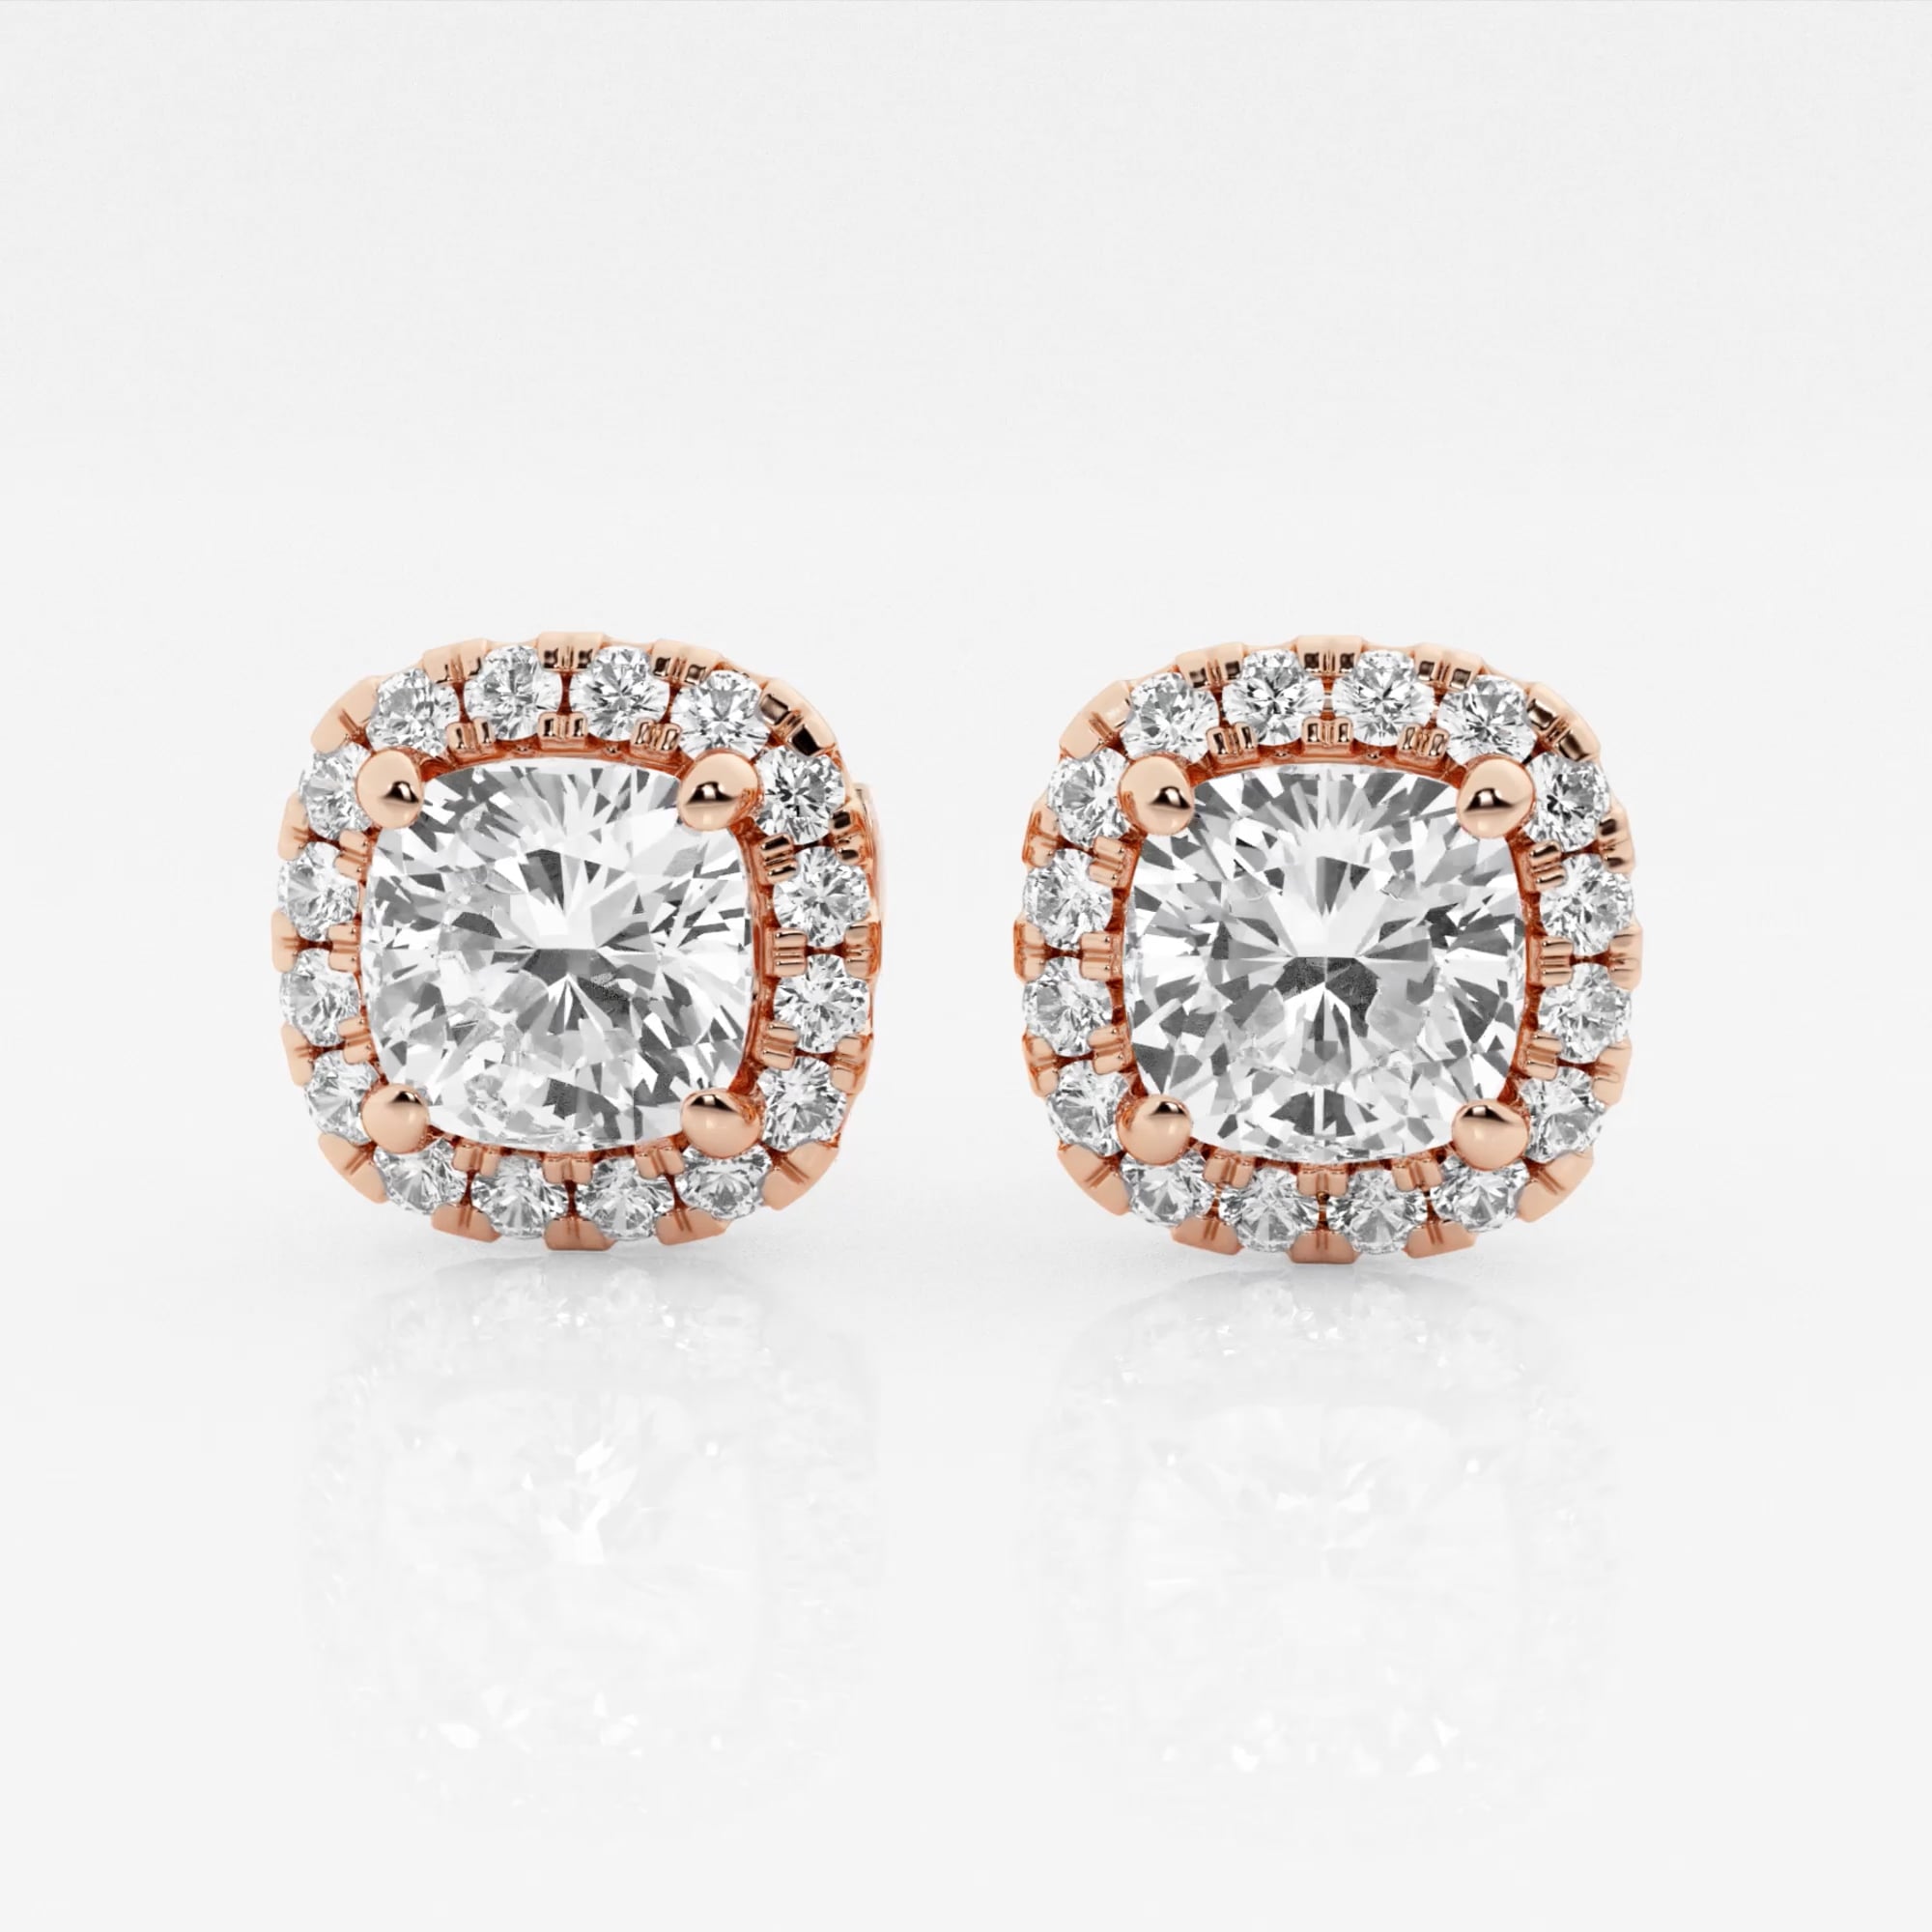 product video for 3 1/2 ctw Cushion Lab Grown Diamond Halo Certified Stud Earrings